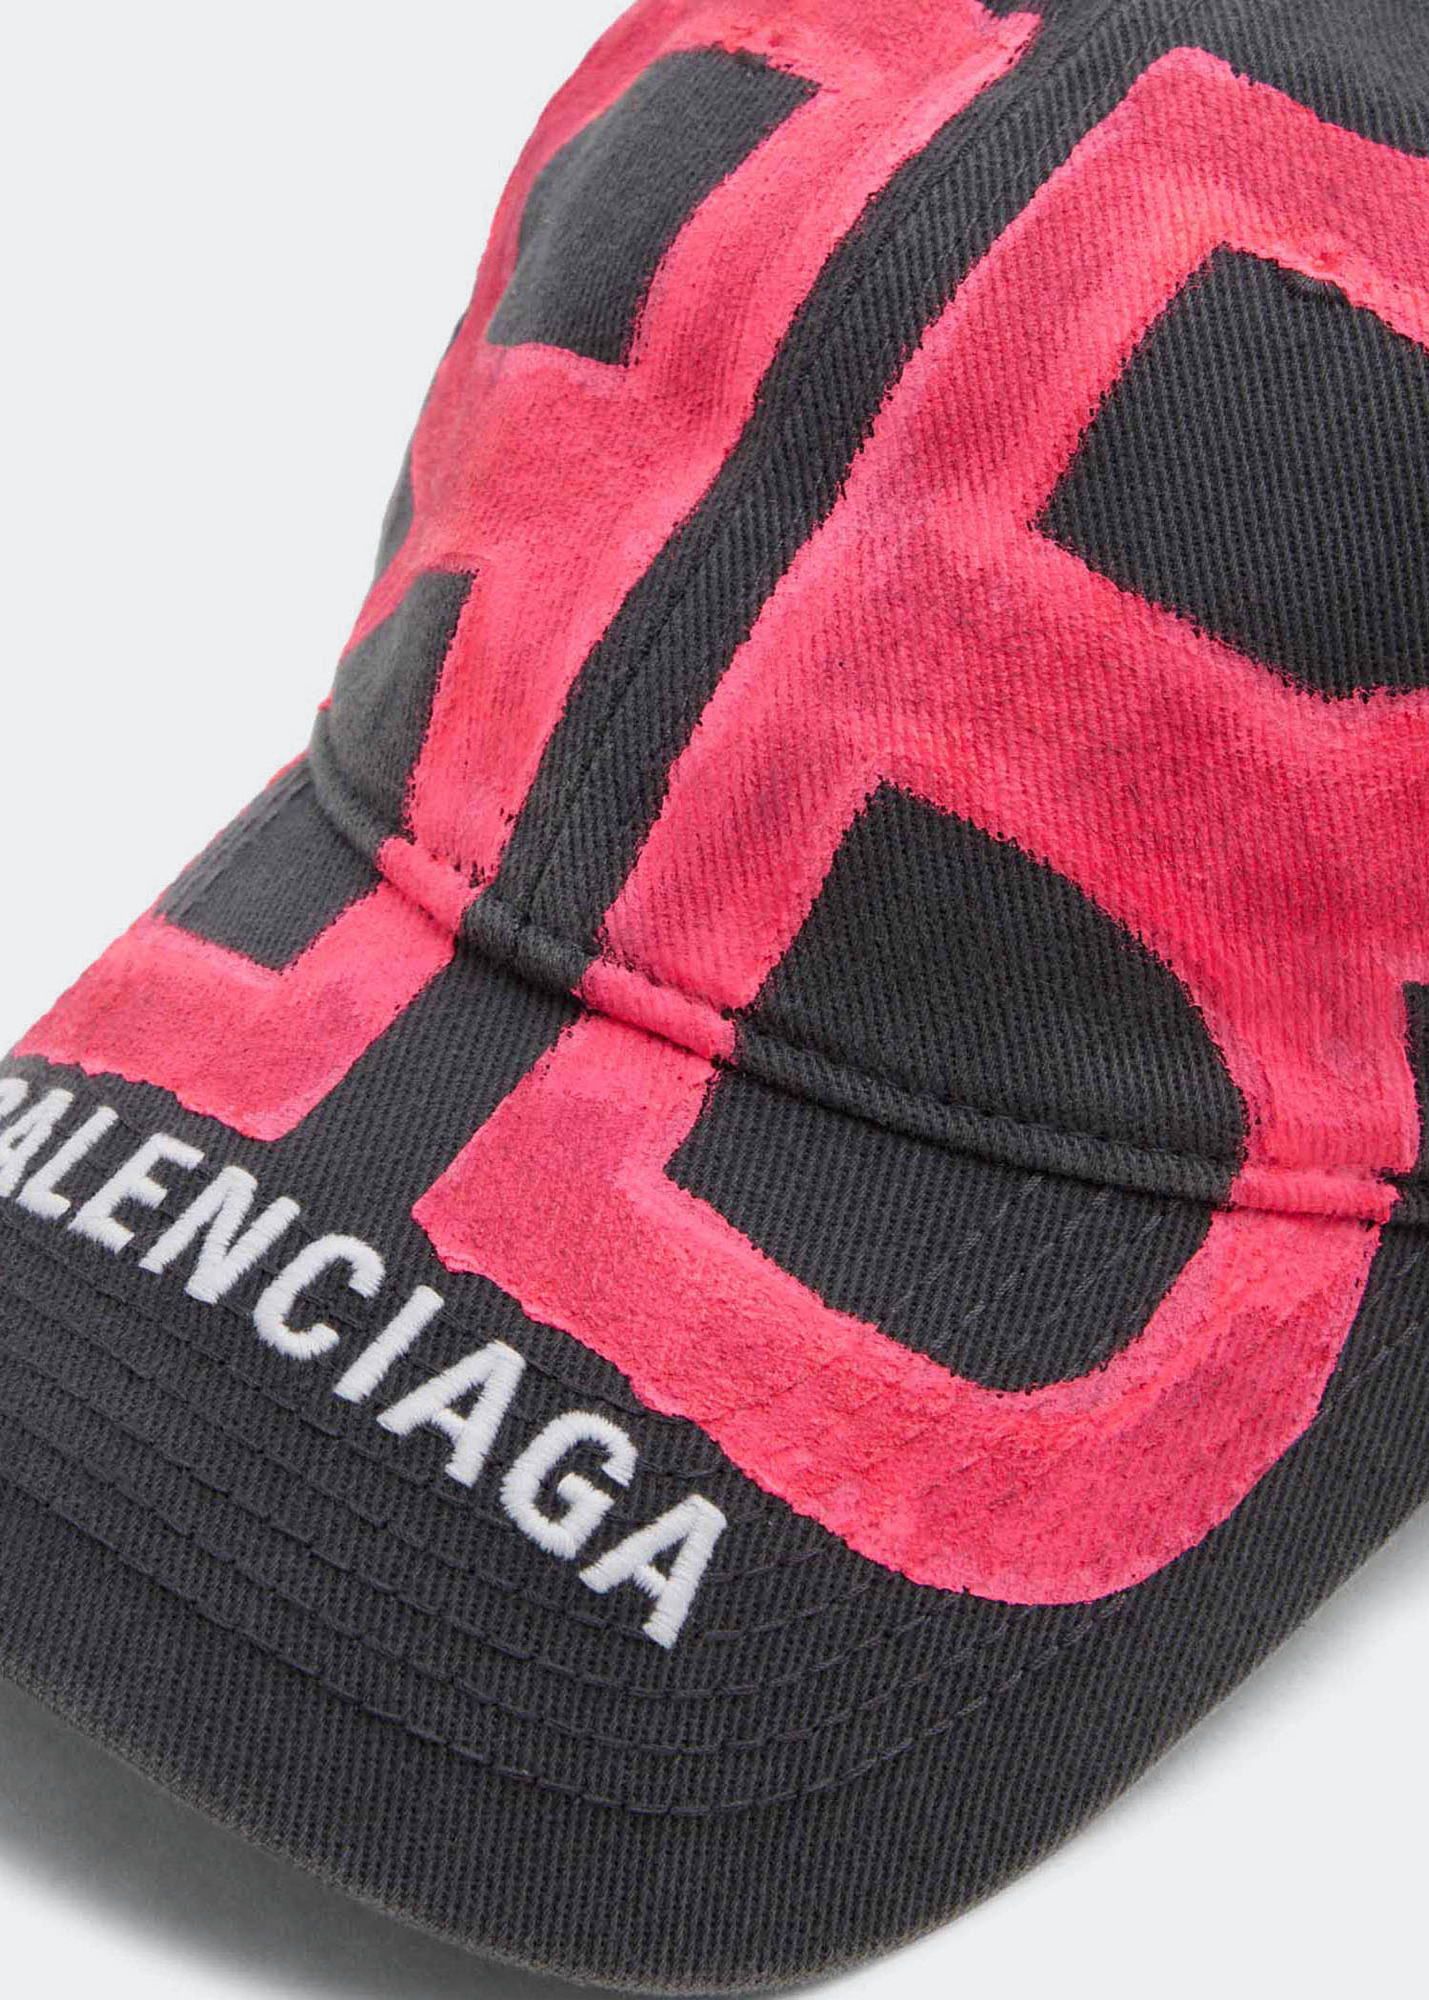 Balenciaga BB sprayed cap for Men - Red in Kuwait | Level Shoes